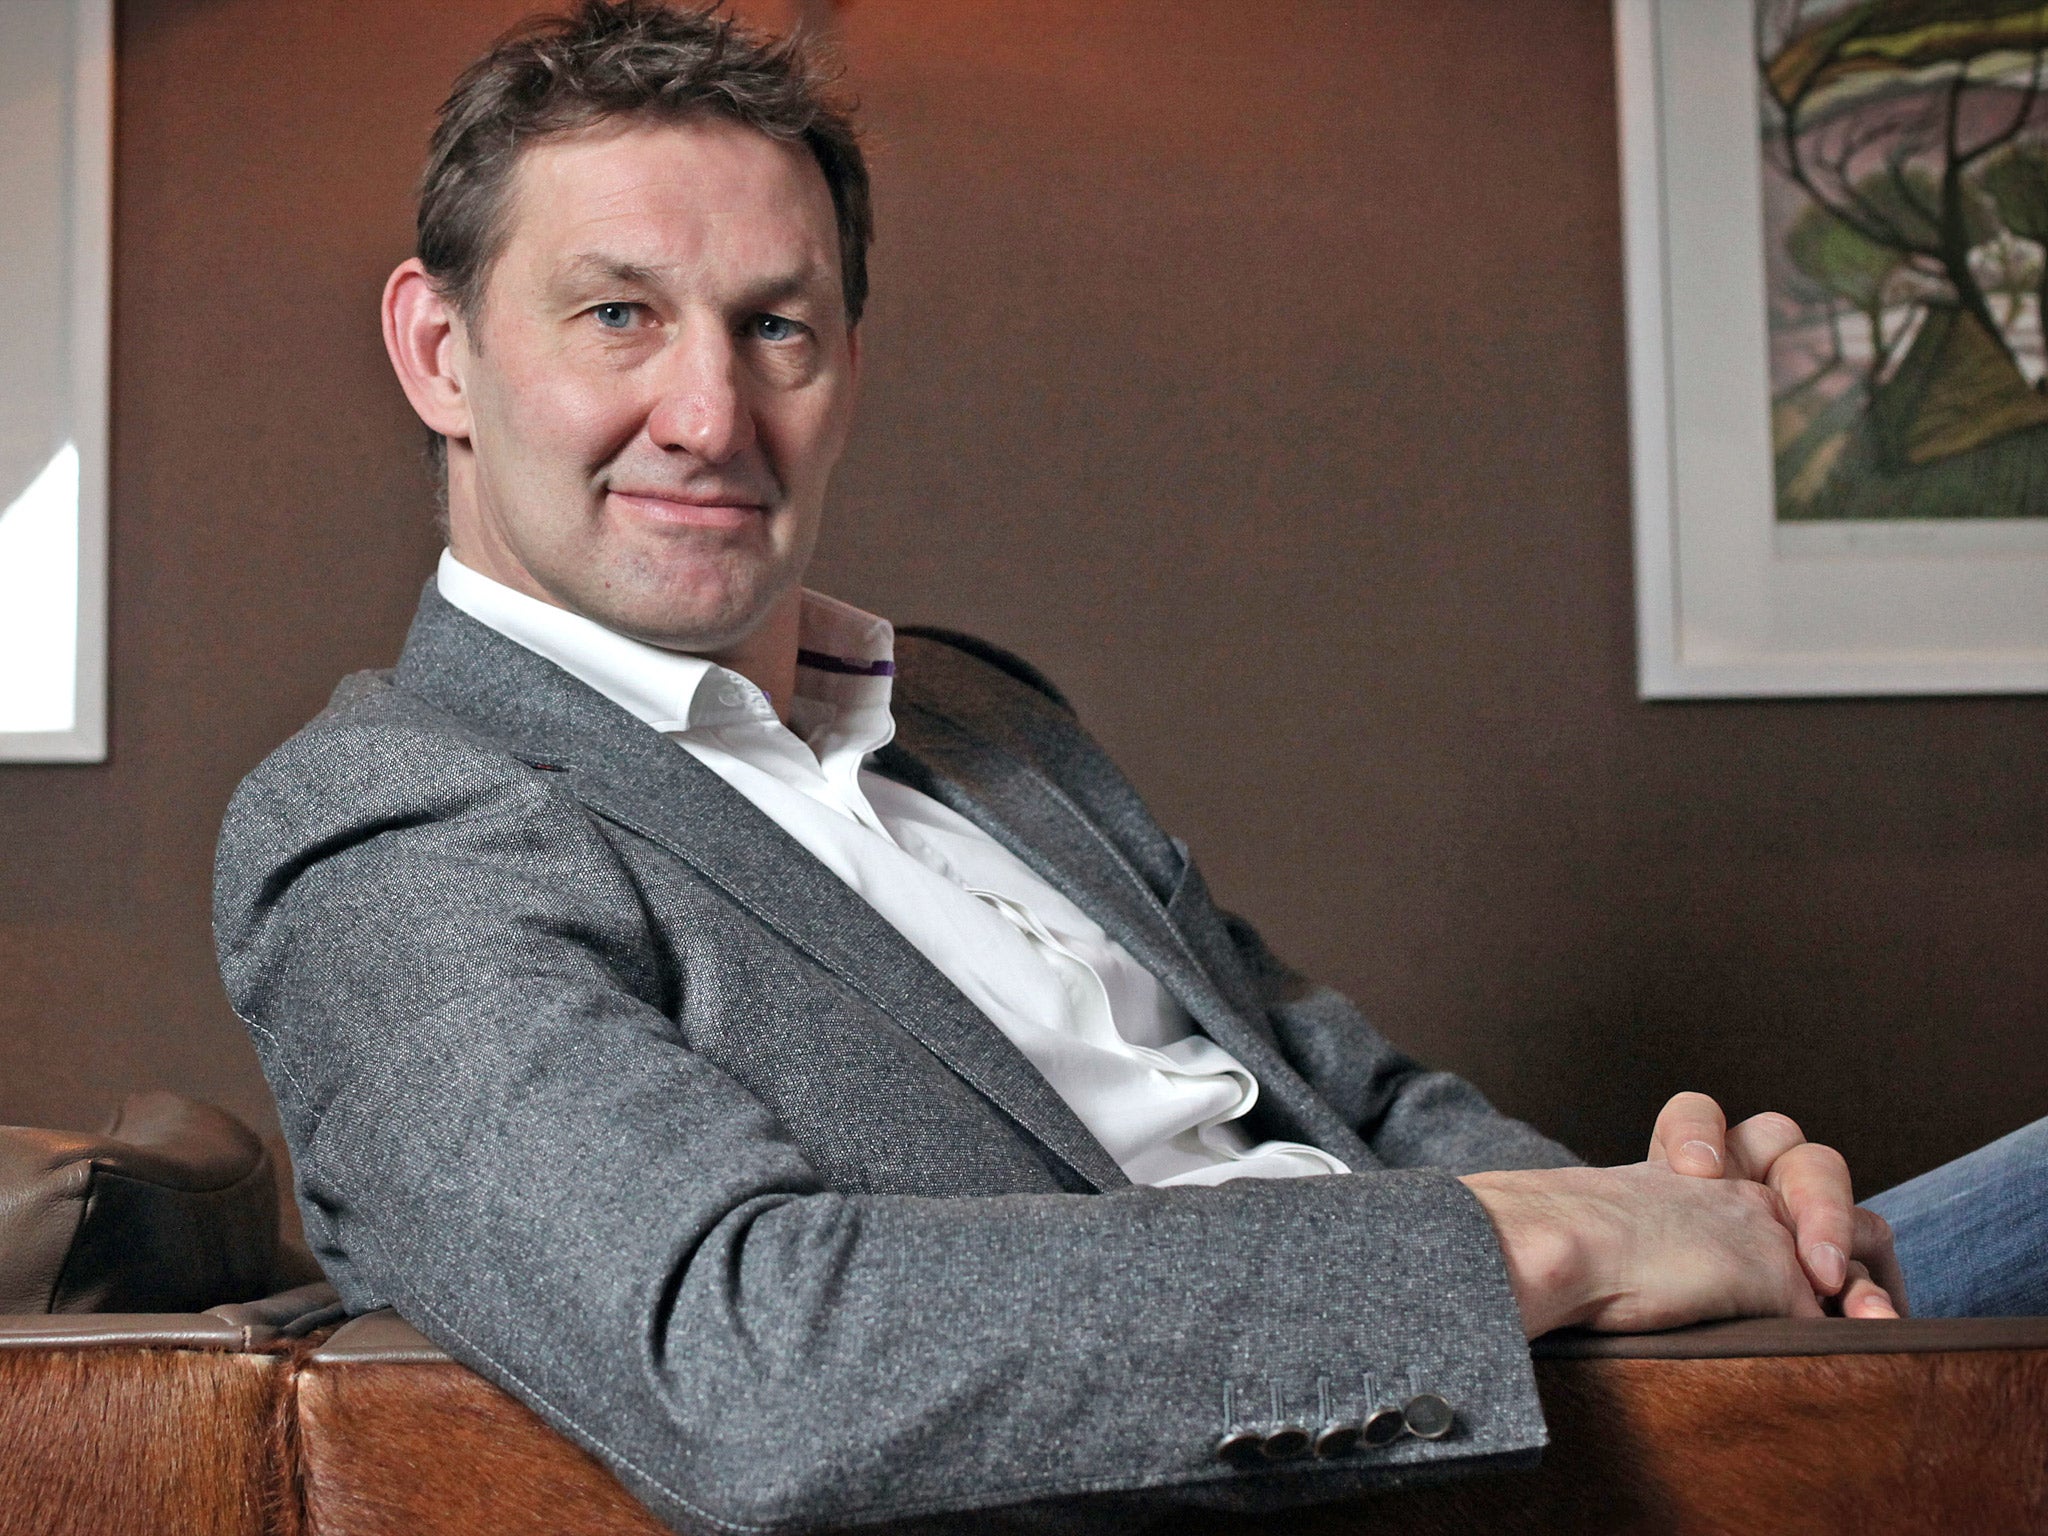 Tony Adams says that young sportsmen need more help dealing with pressure